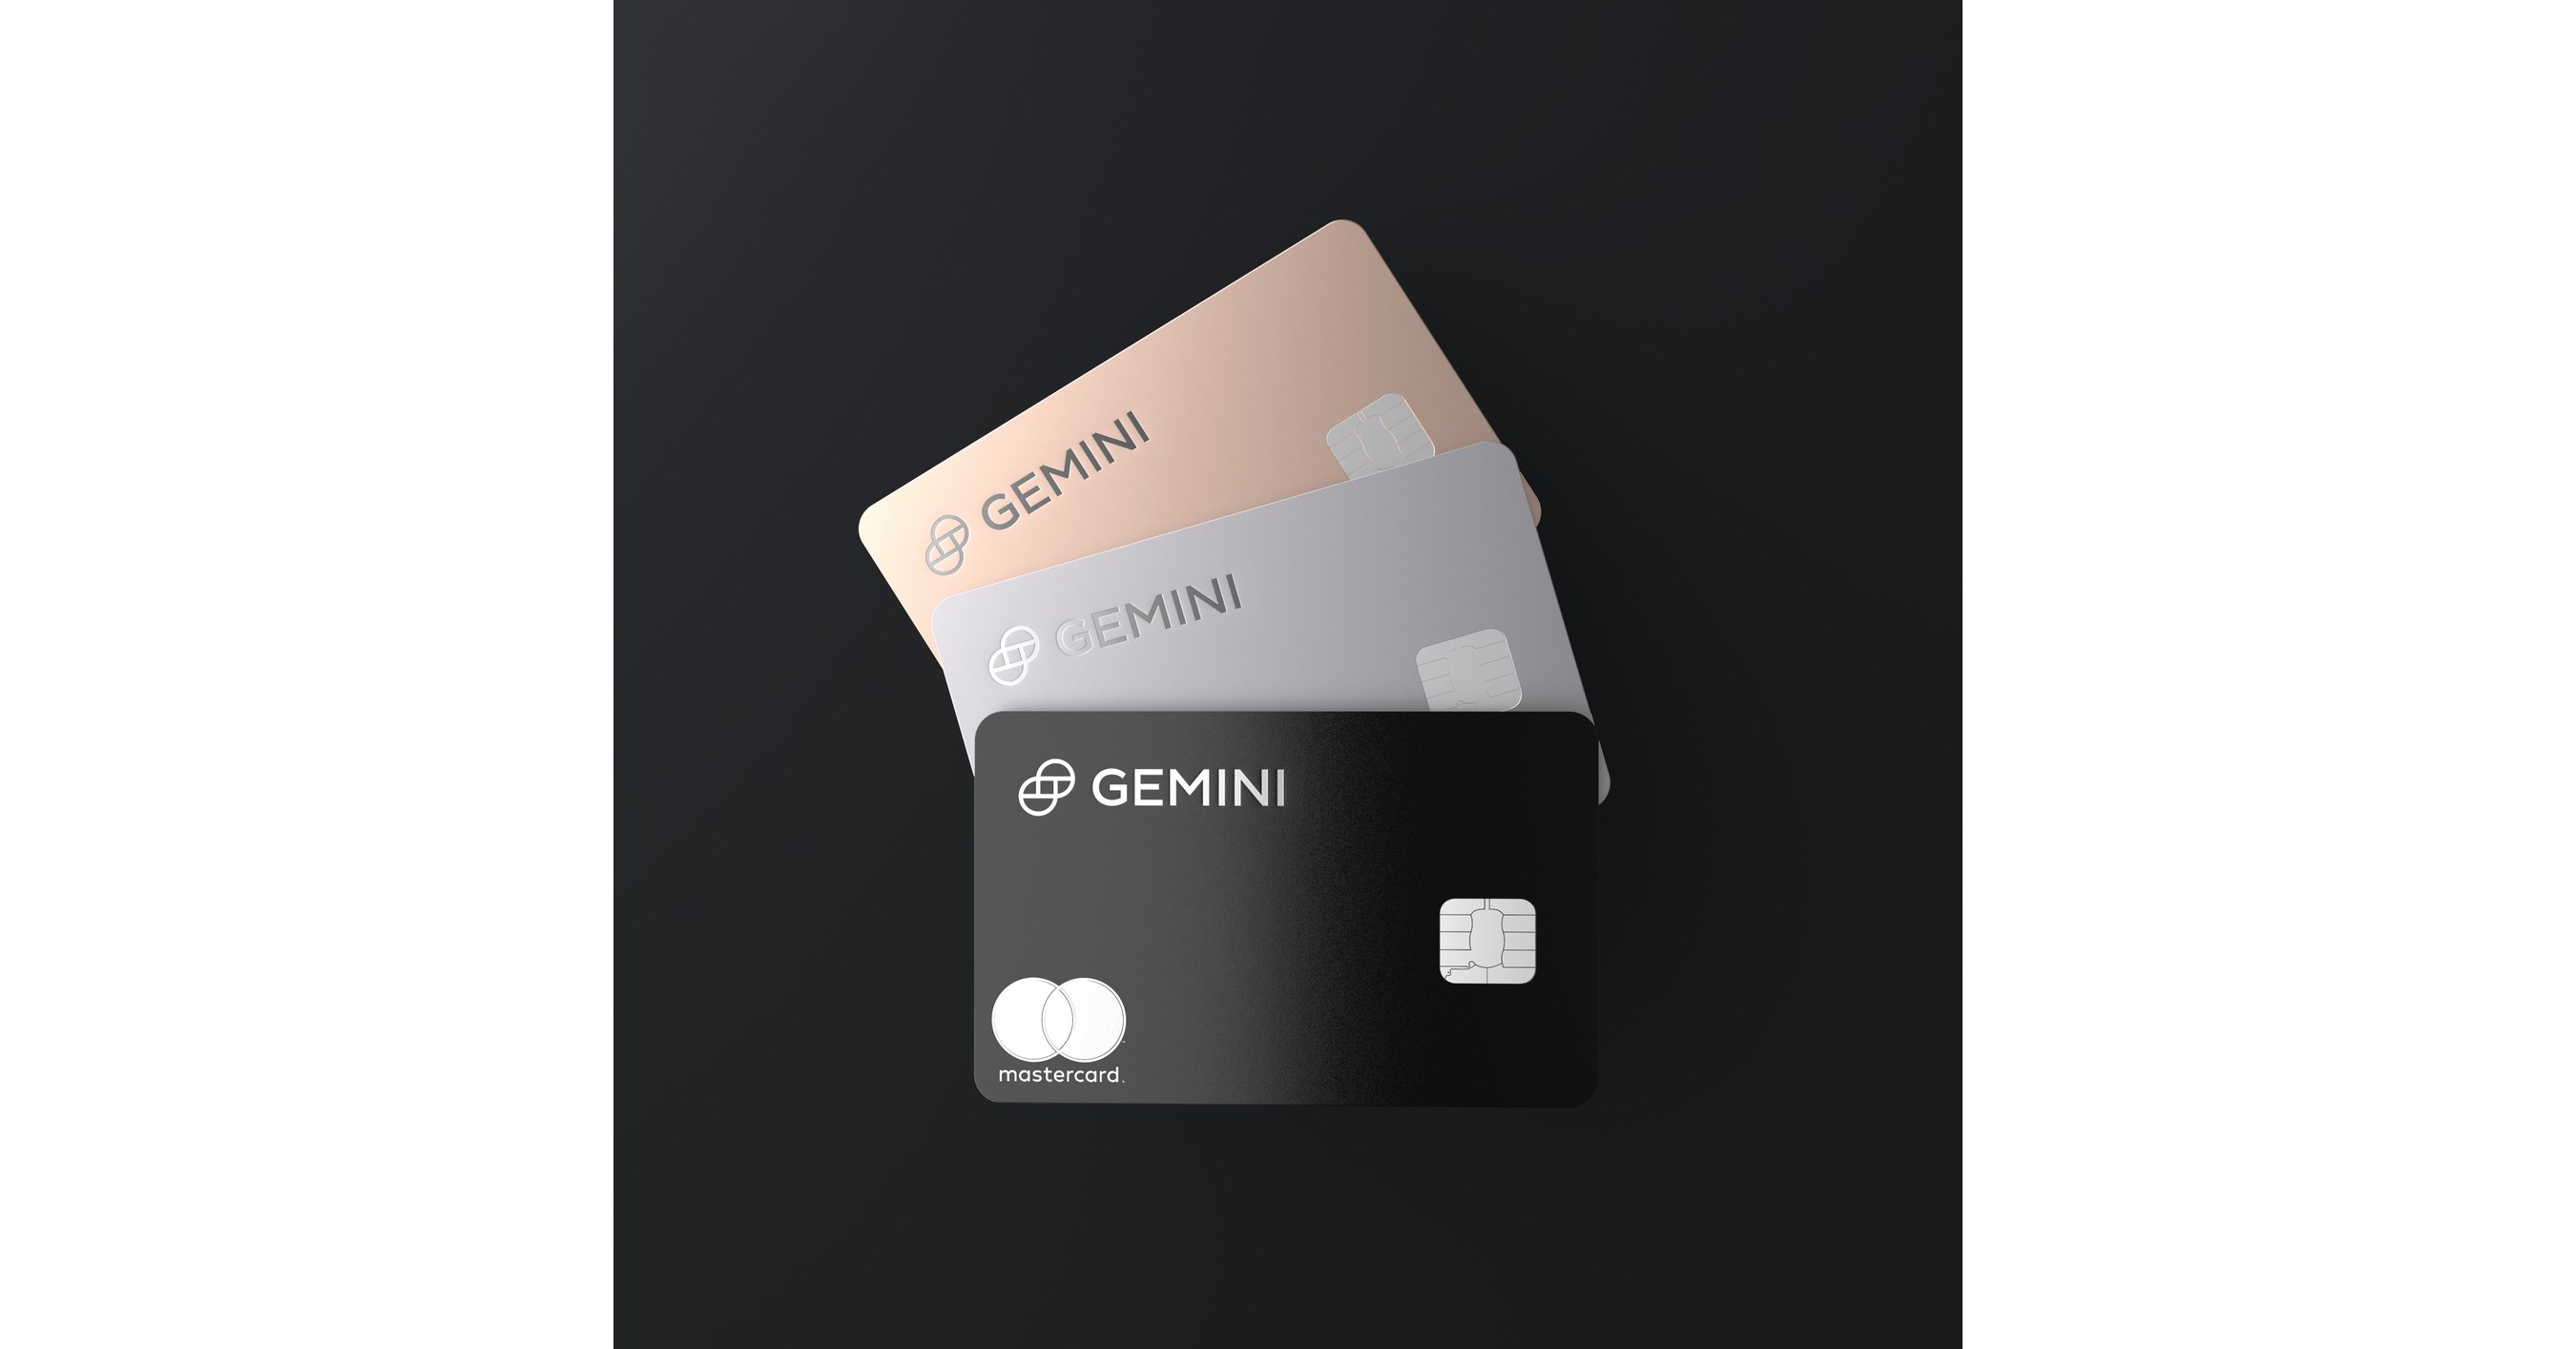 Gemini Partners with Mastercard to Launch New Crypto ...